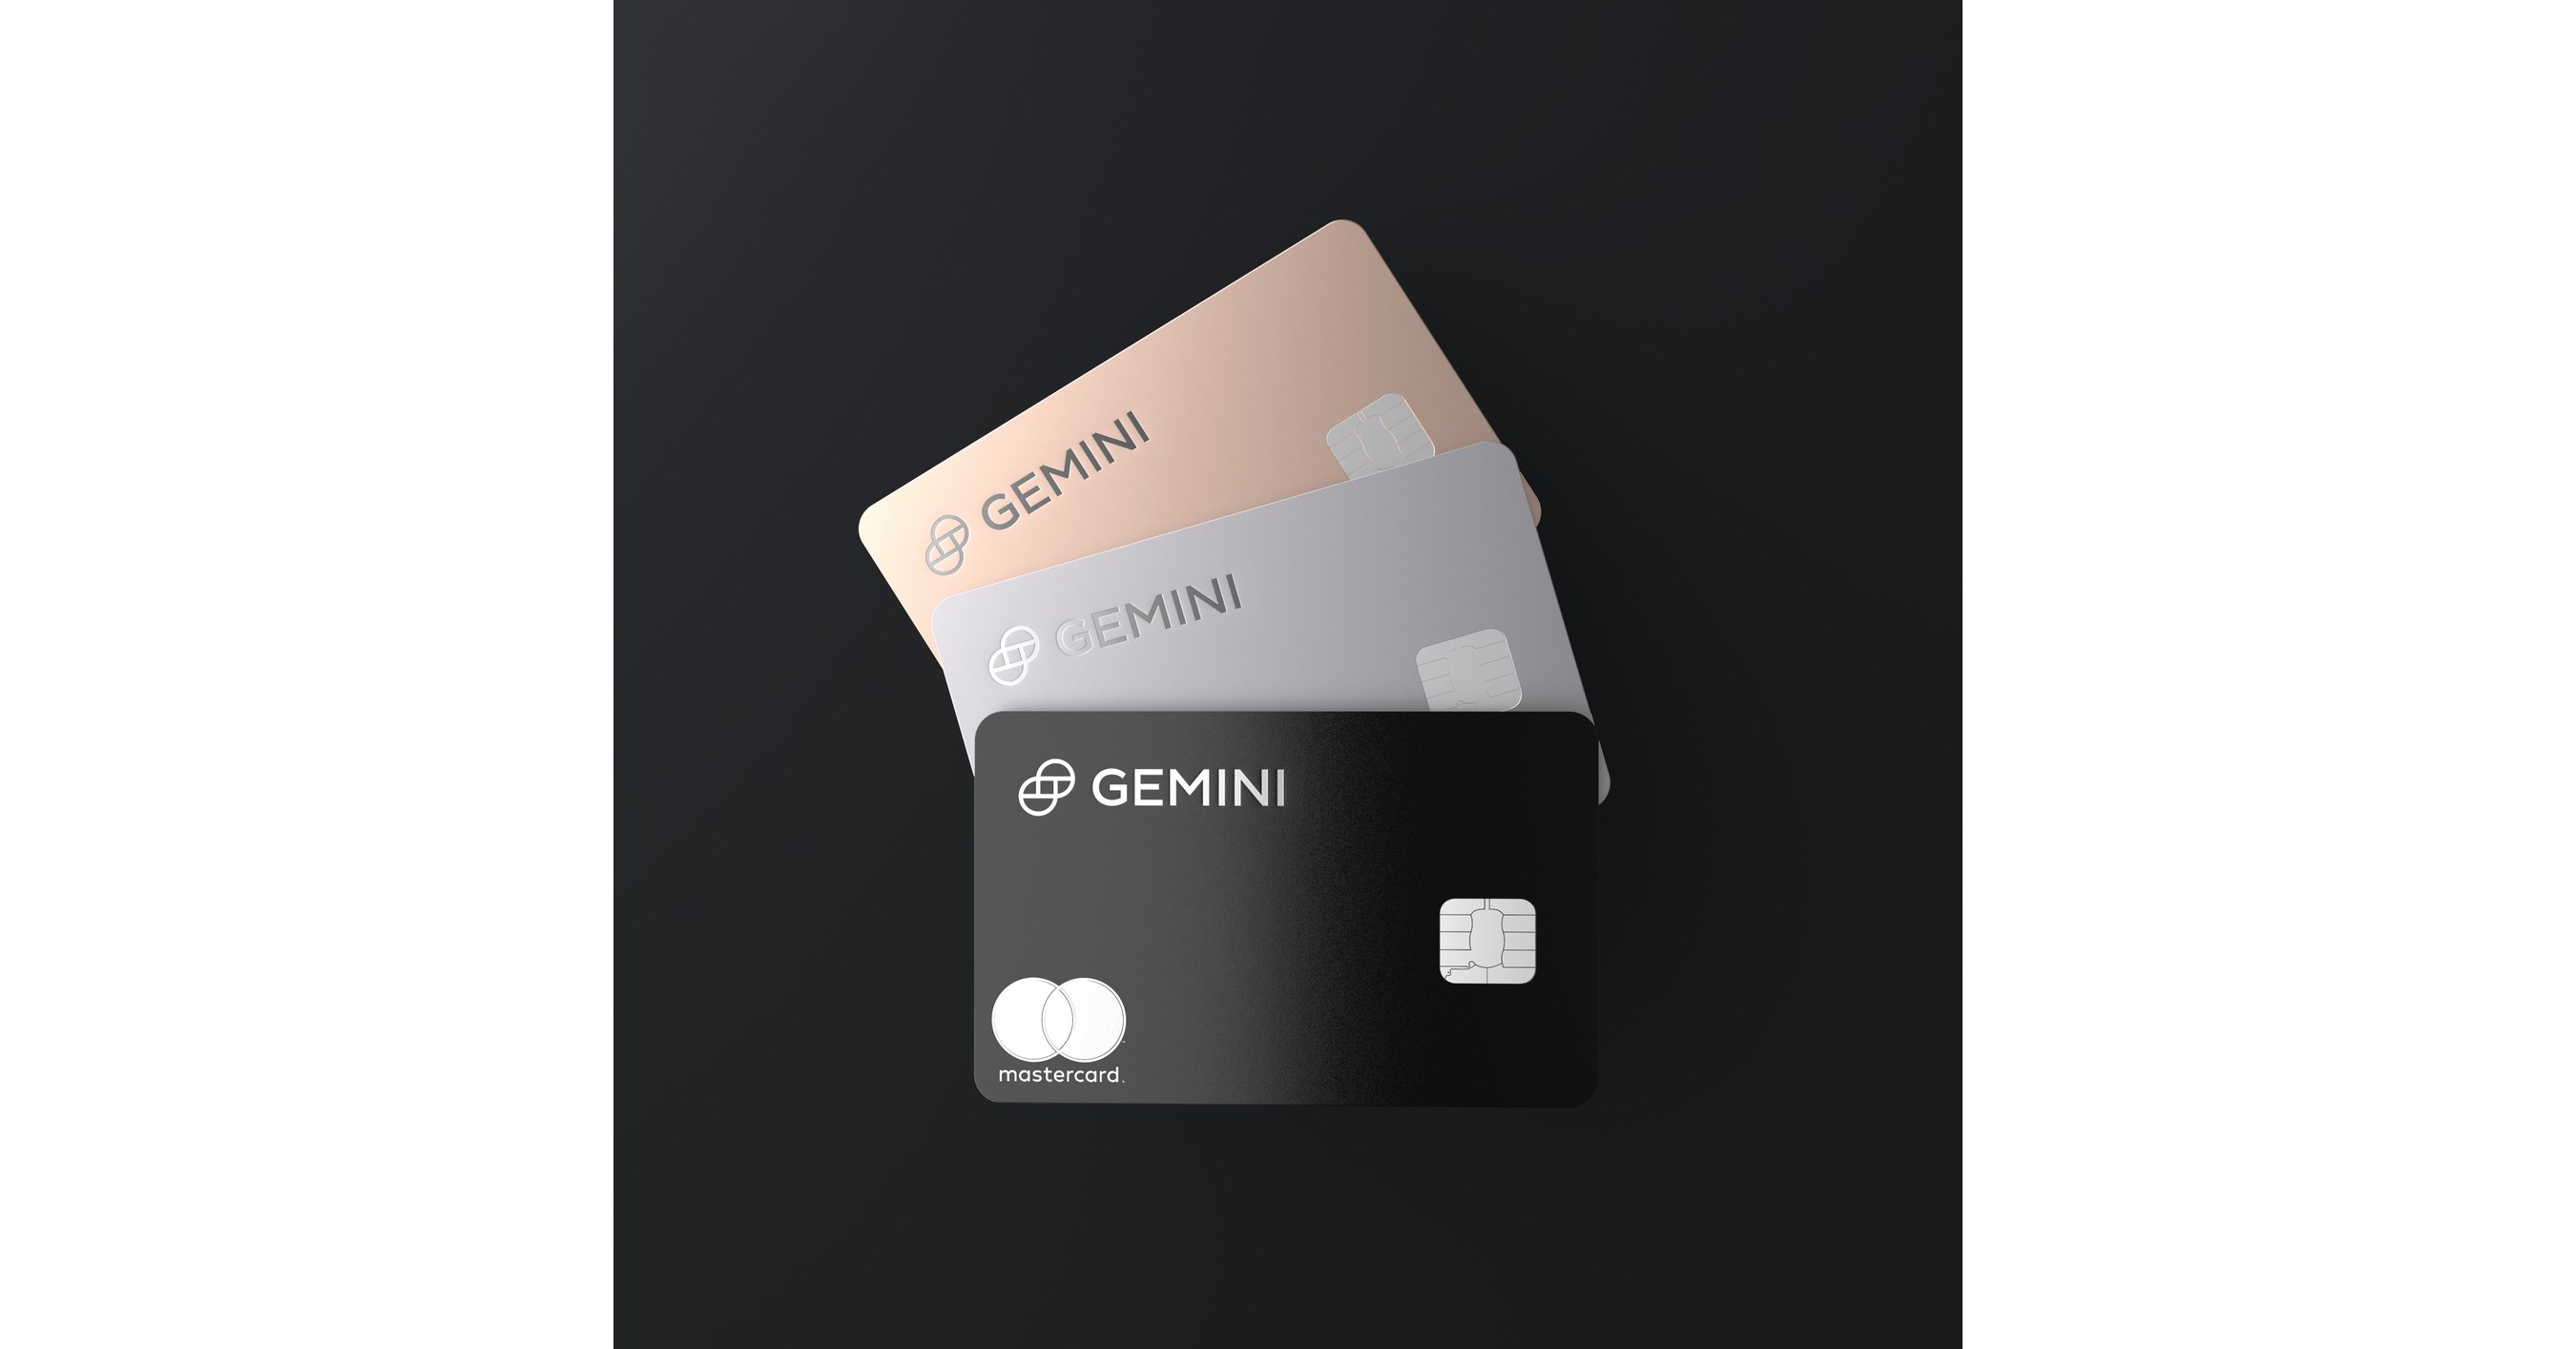 Gemini Partners with Mastercard to Launch New Crypto ...